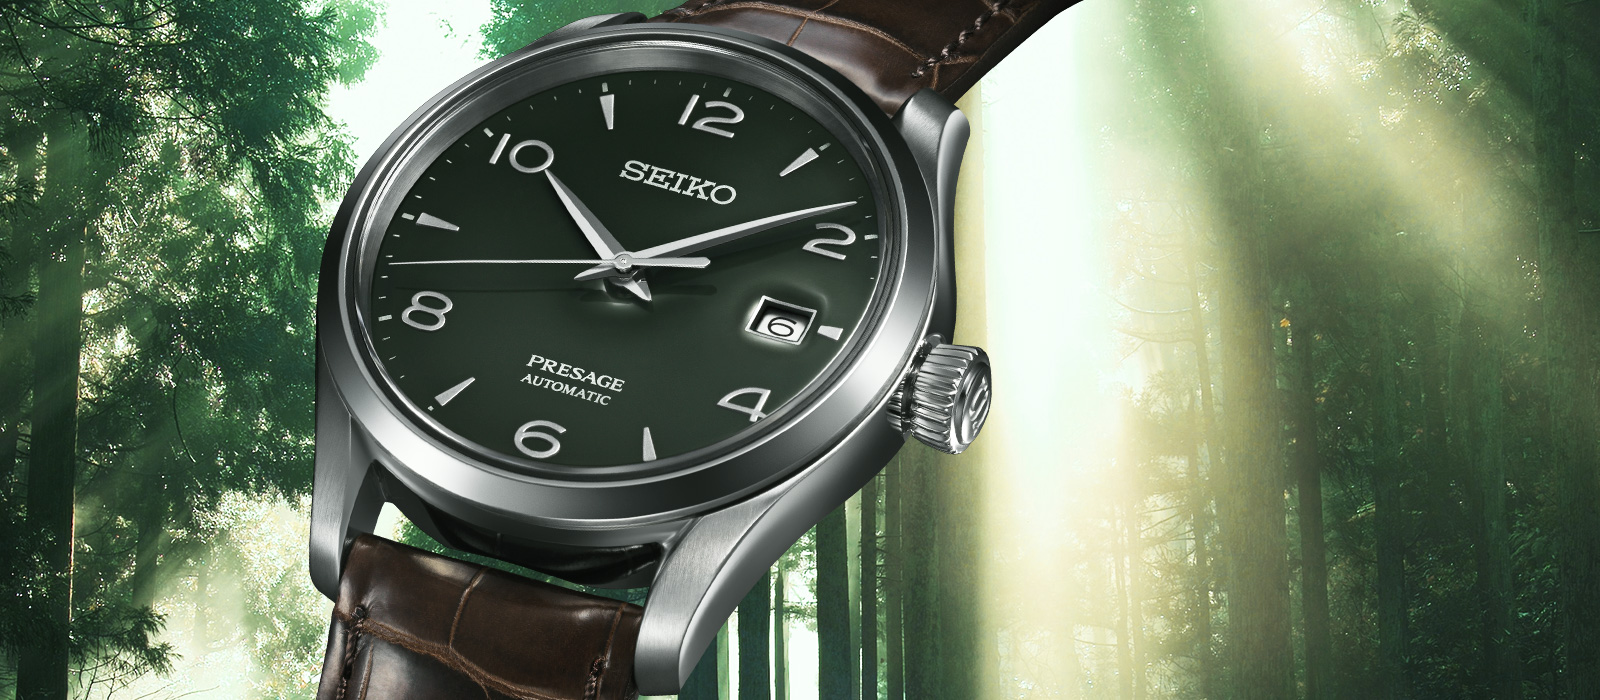 The image of green enamel dial